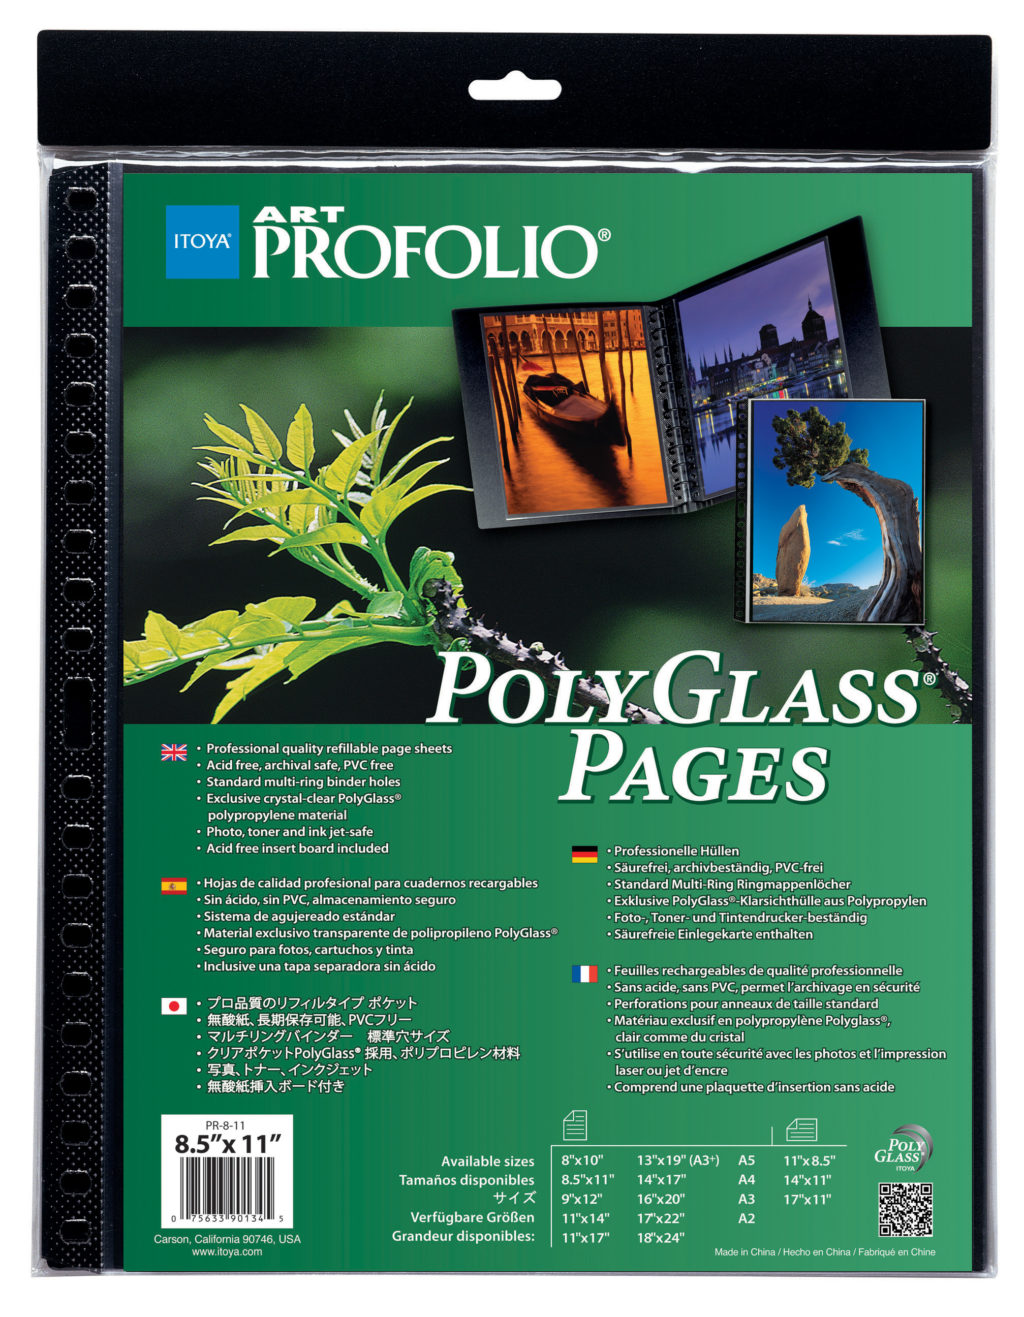 Itoya 8.3x11.7" A4 Size PolyGlass Refill Pages 10 Pages per Pack #PR-A4 